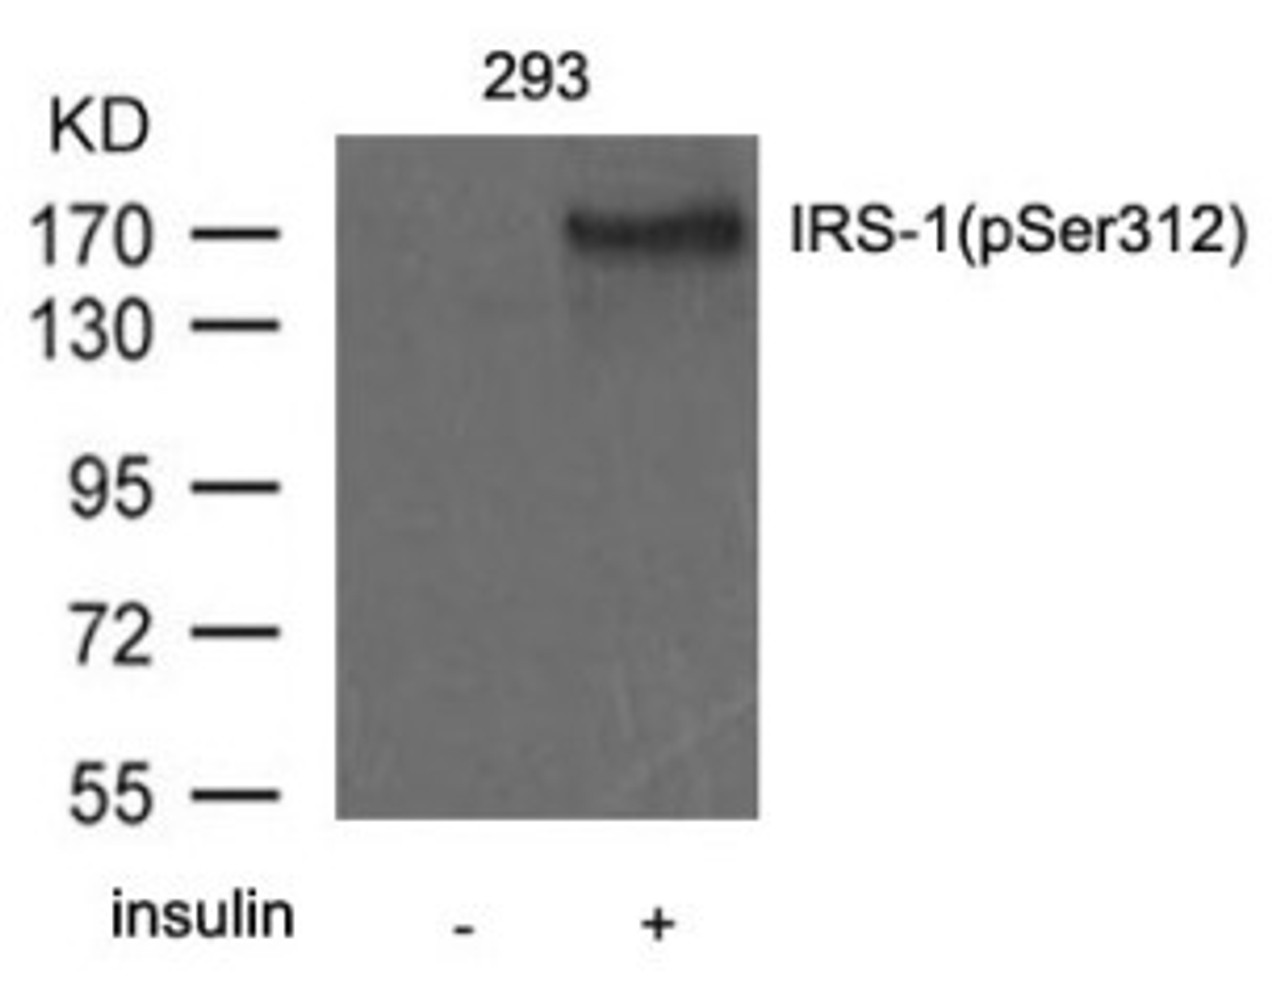 Western blot analysis of extract from 293 cells untreated or treated with insulin using IRS-1 (Phospho-Ser312) .